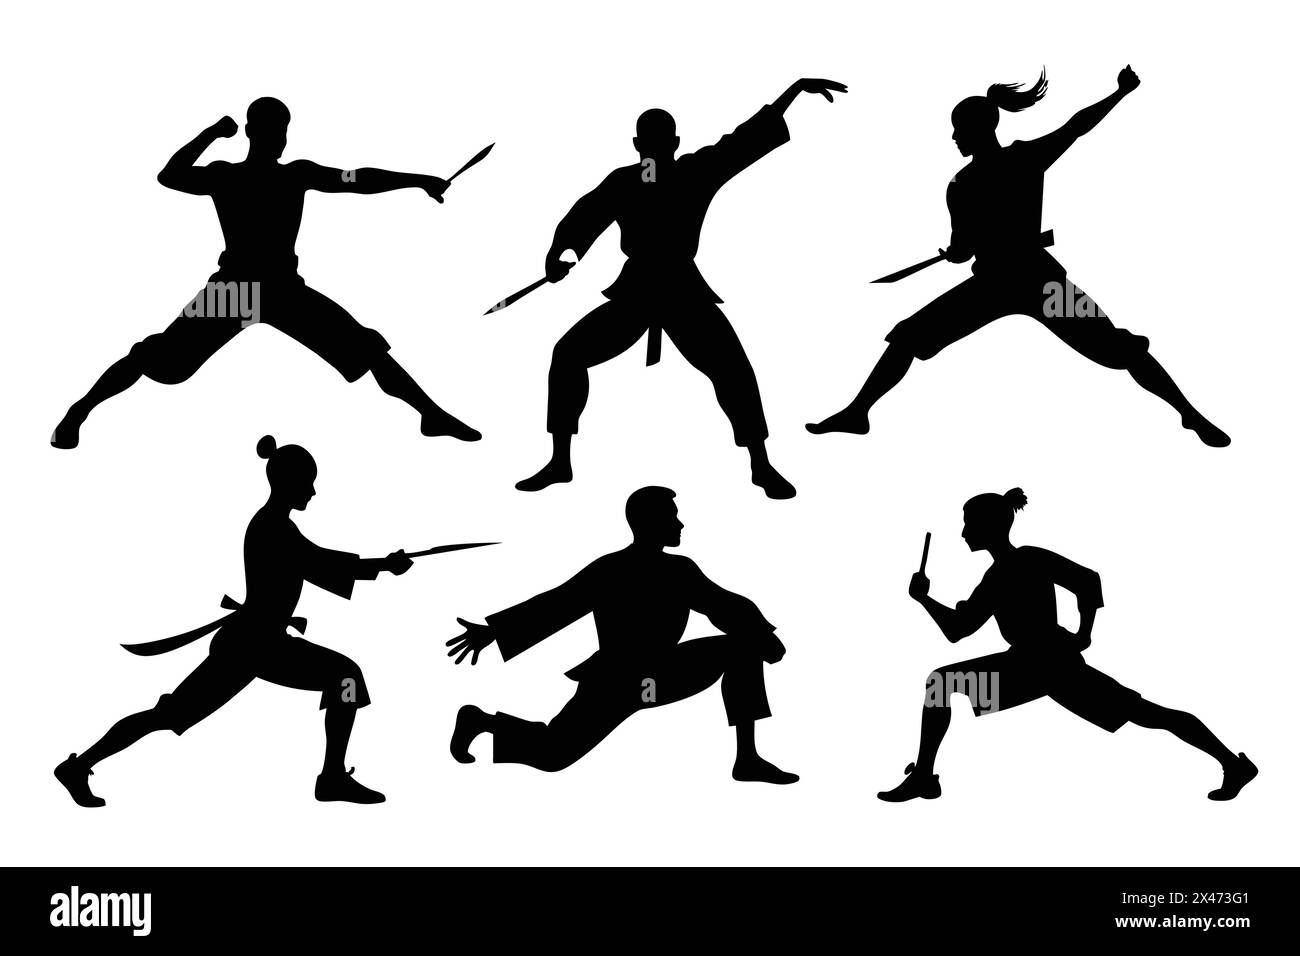 Wushu Silhouette collection vector illustration Stock Vector